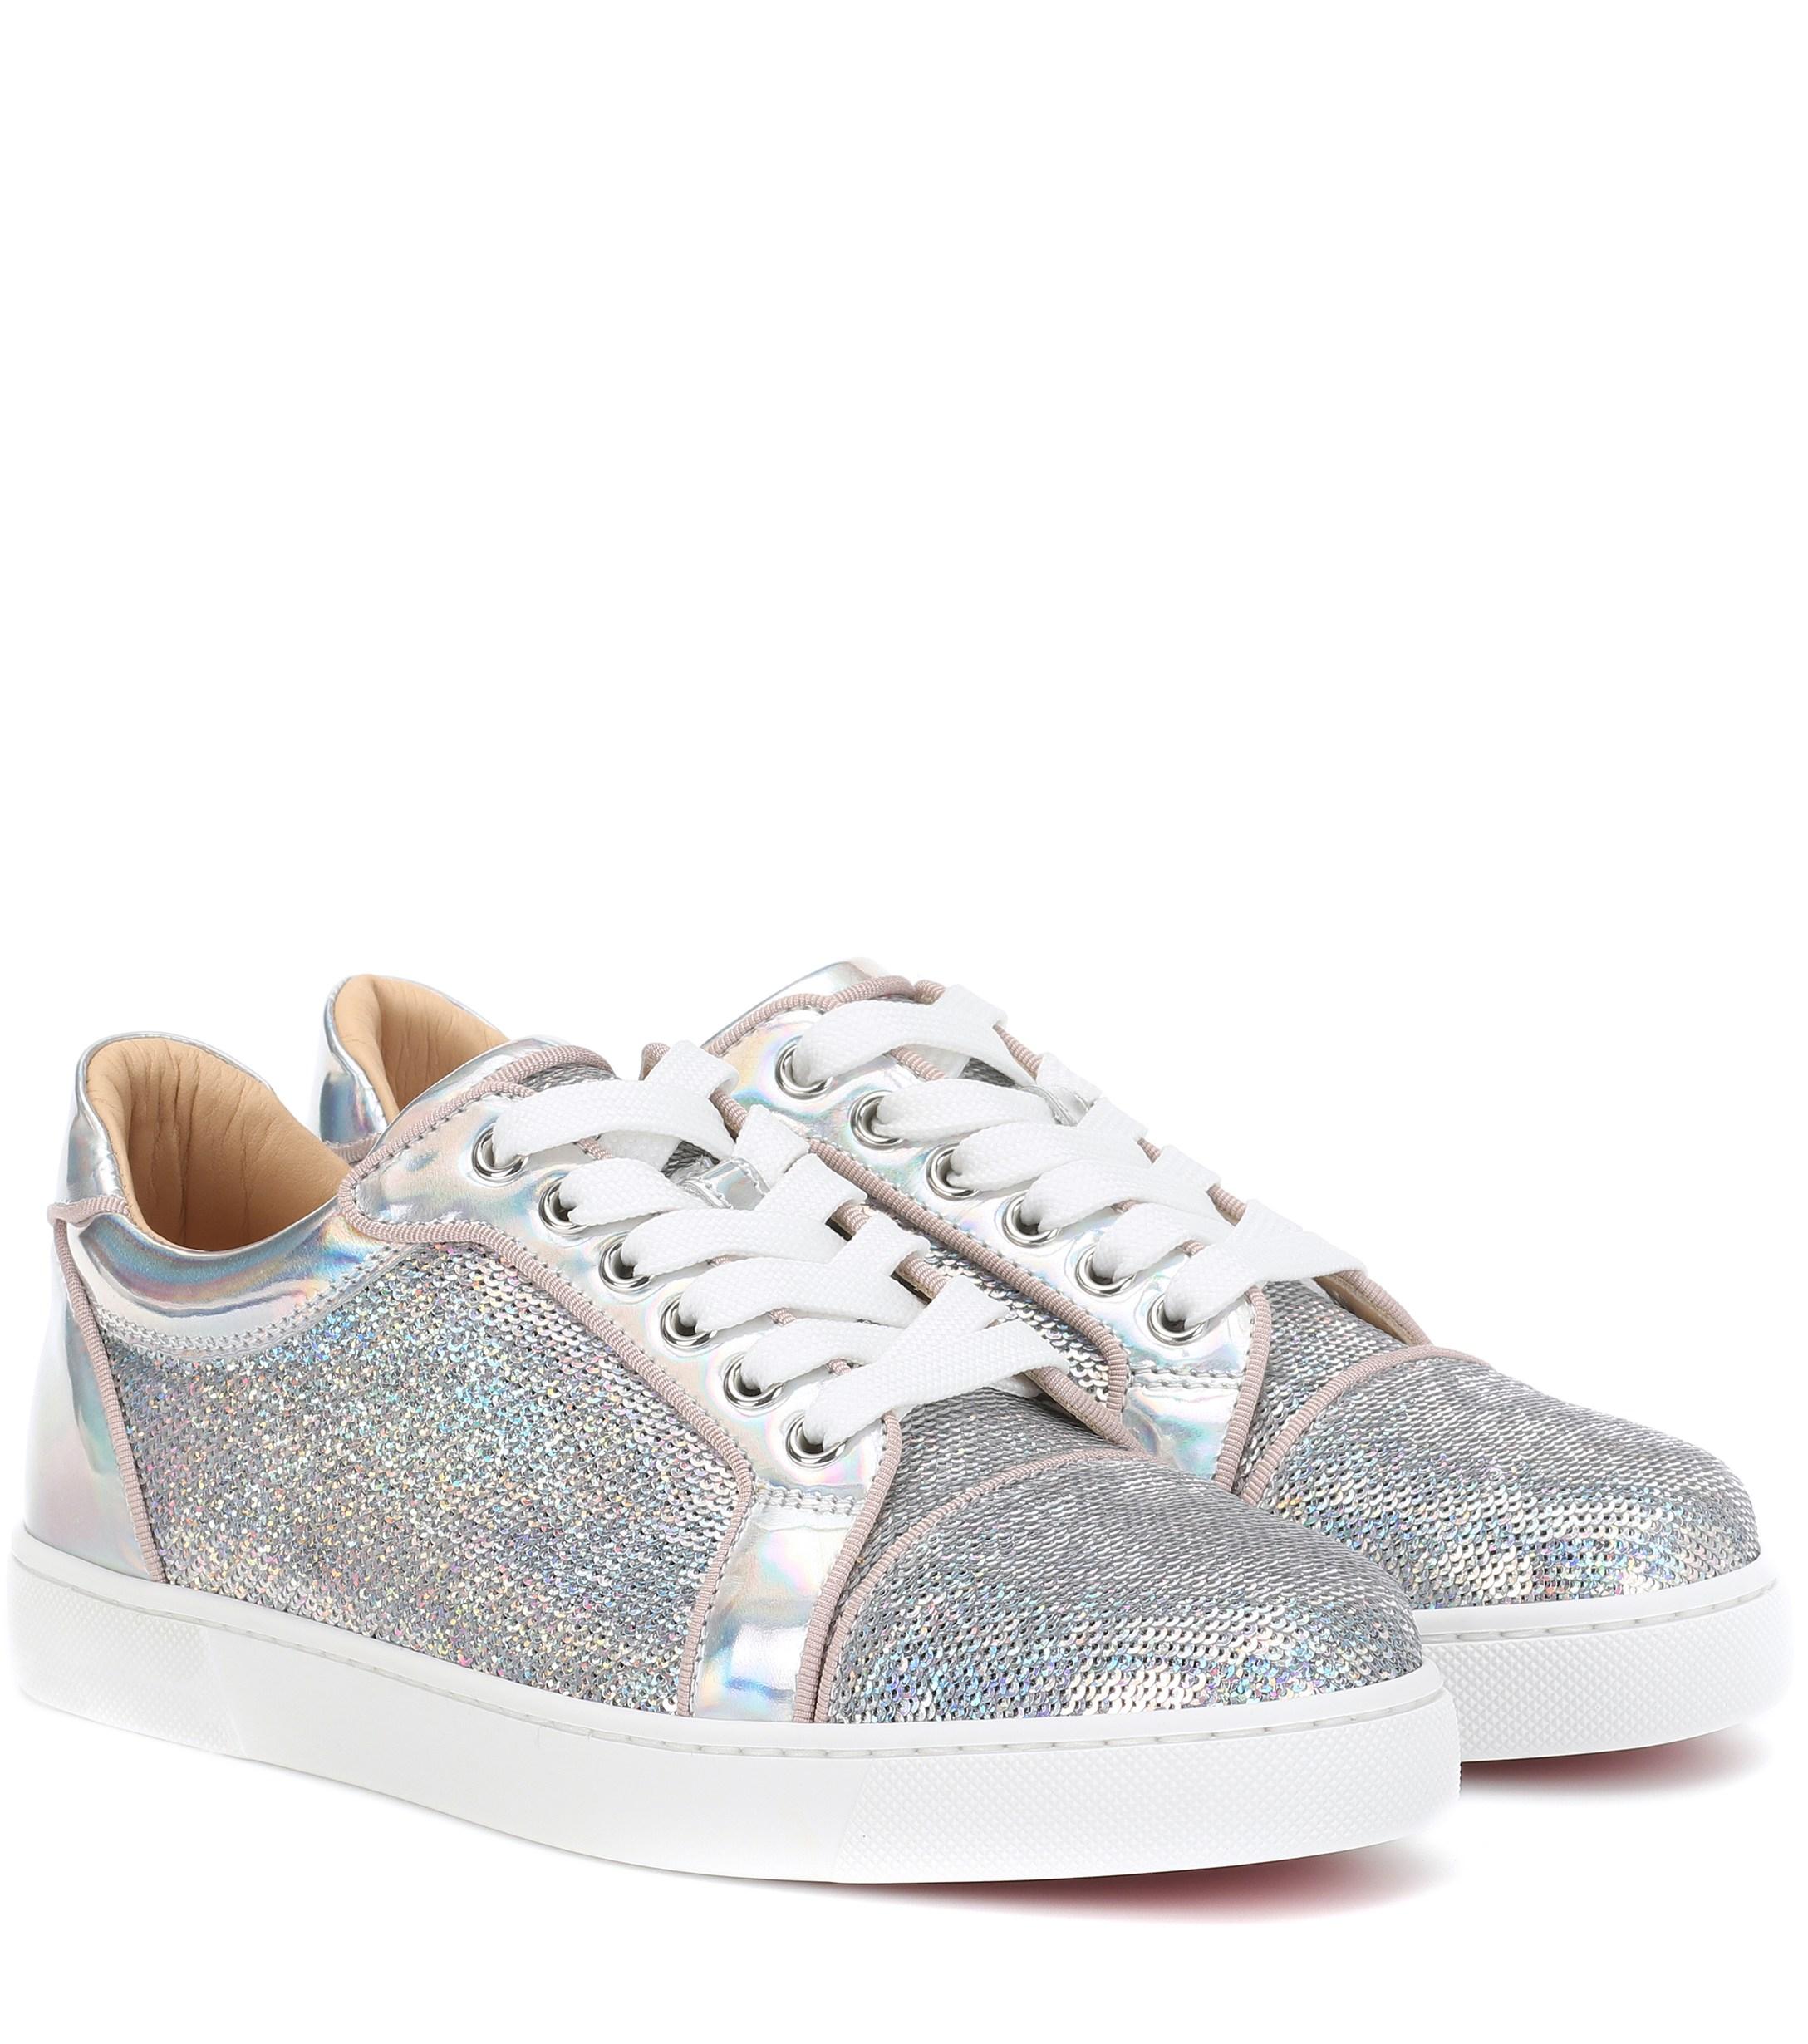 Christian Louboutin Vieira Sequined Sneakers in Metallic - Lyst